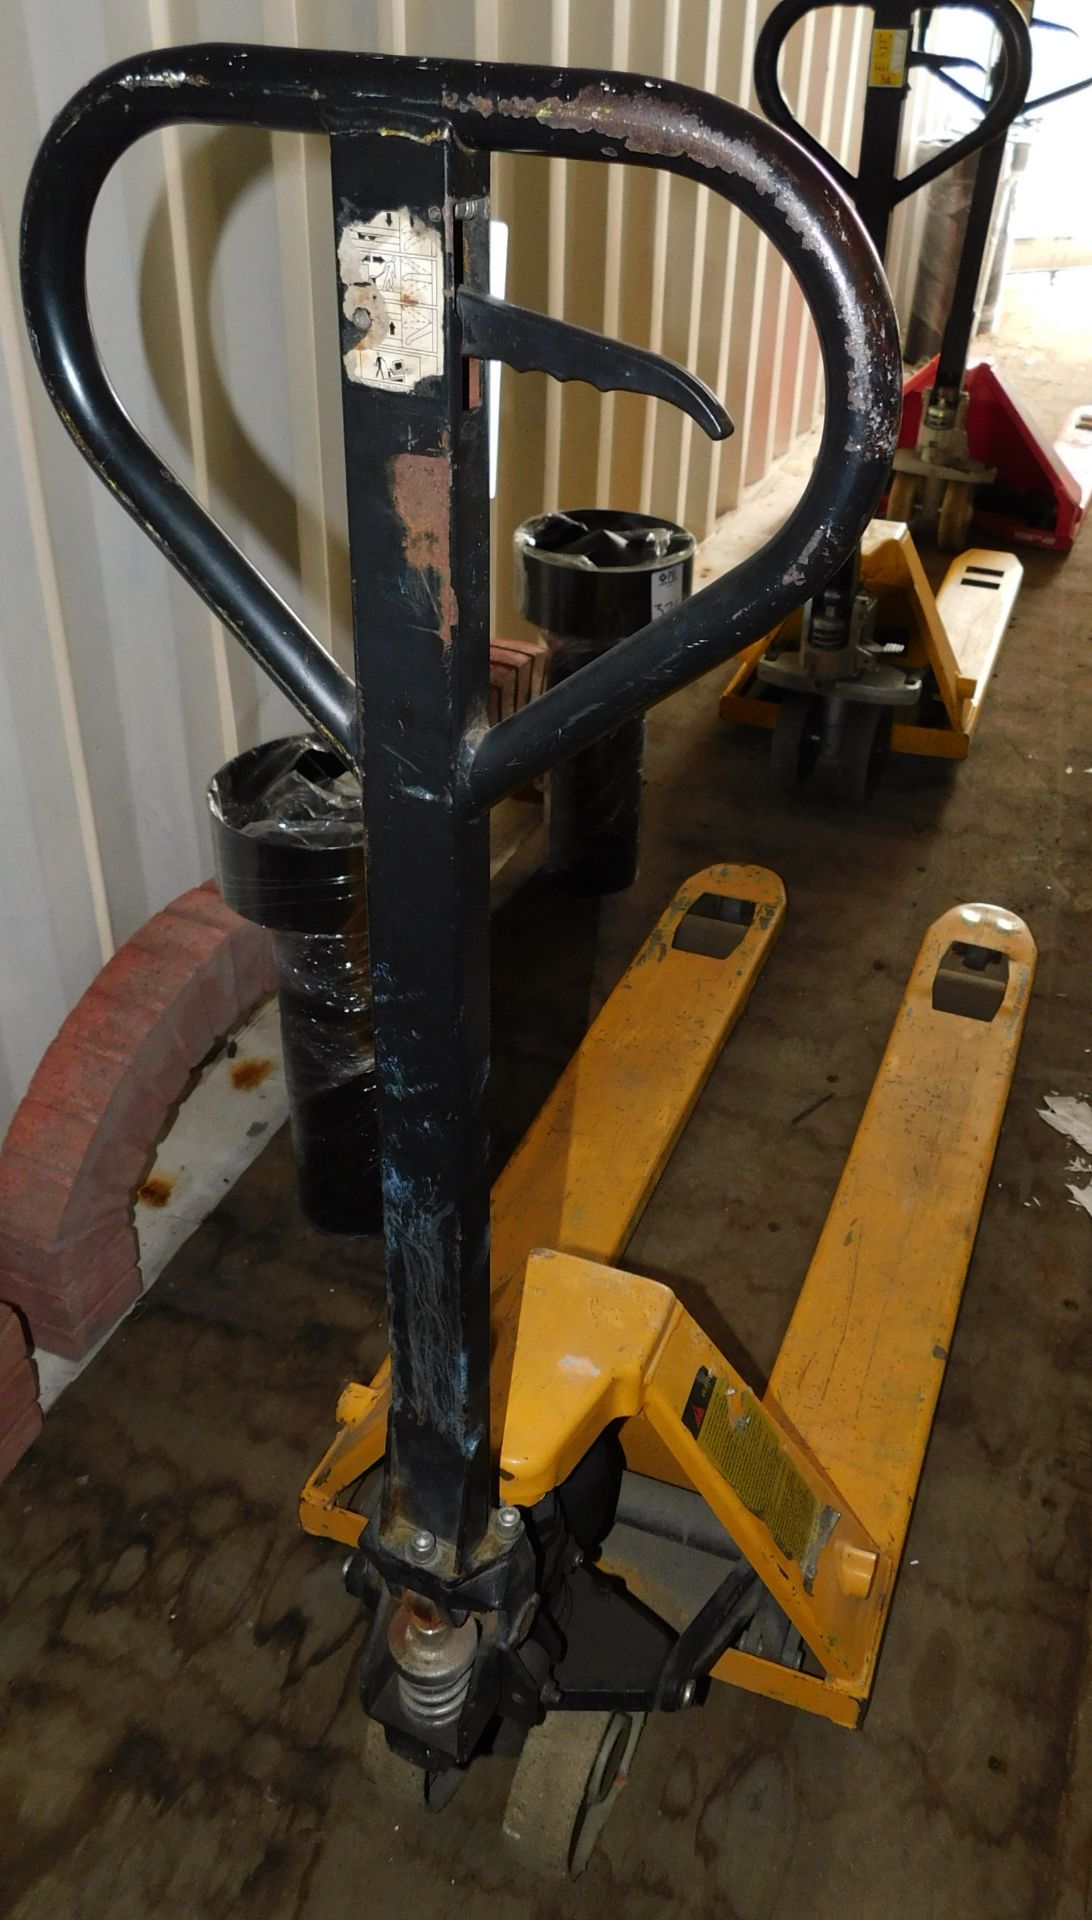 Narrow-Blade Pallet Truck, 2,500kg (Collection Delayed Until Tuesday 16th April) (Located